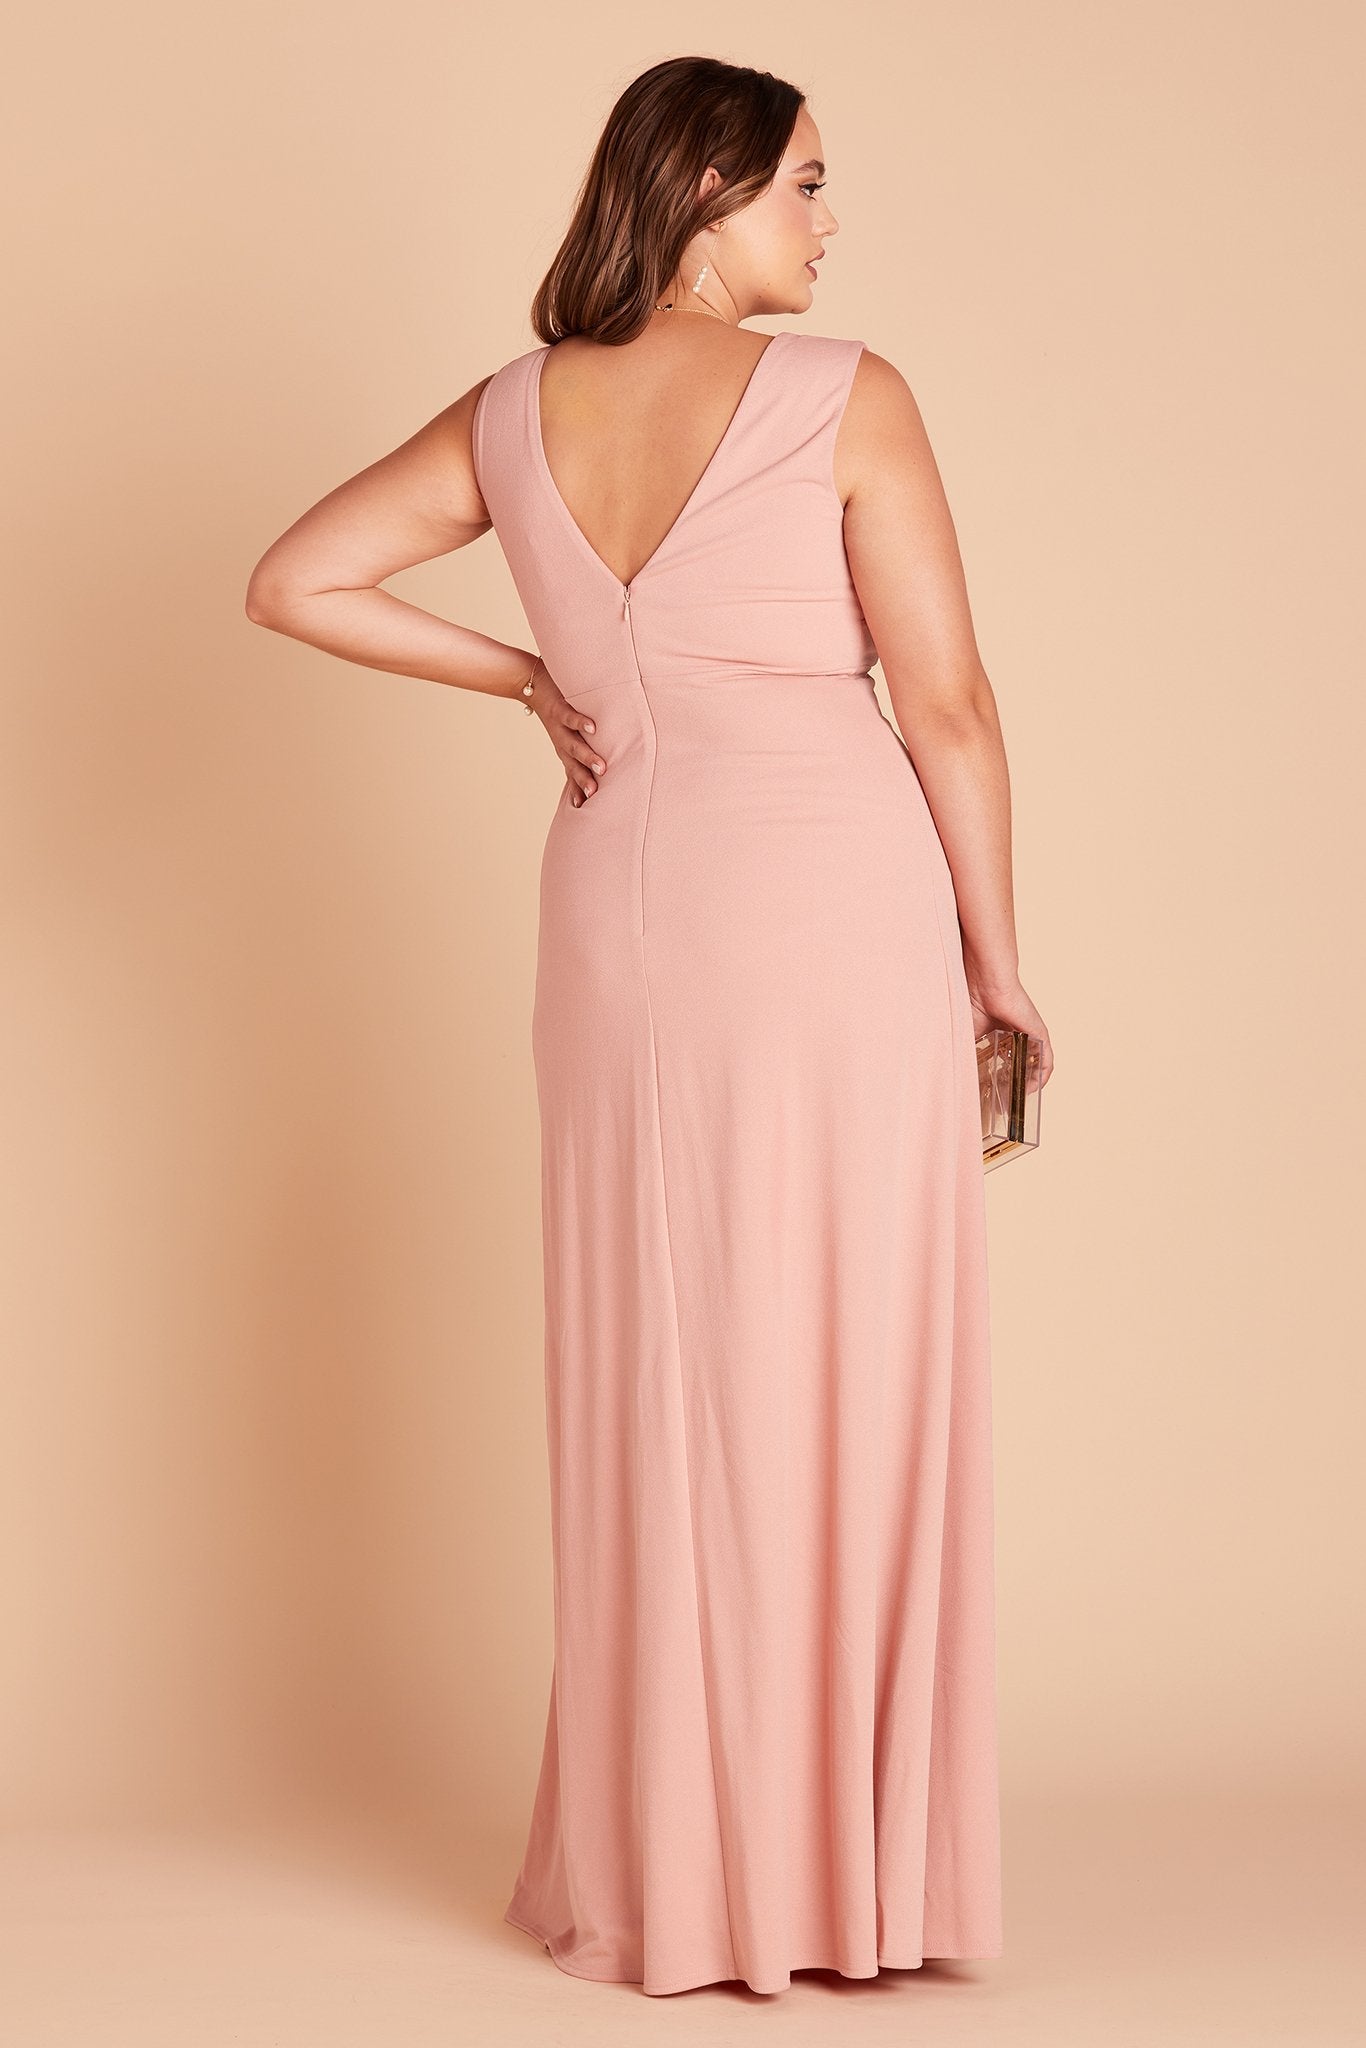 Shamin plus size bridesmaid dress in rose quartz crepe by Birdy Grey, back view